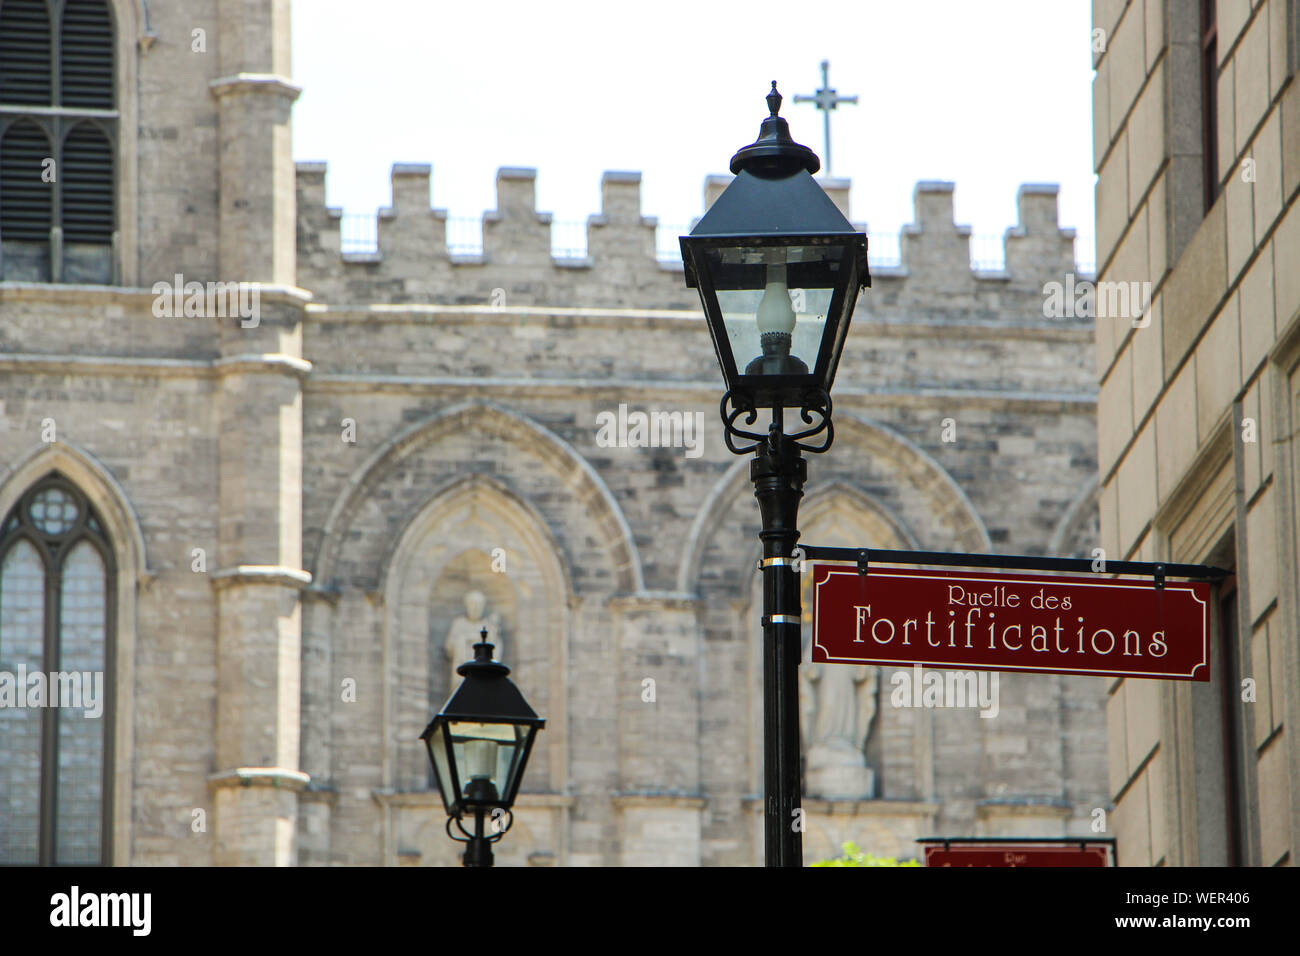 Low Angle View Of Ruelle Des Fortifications Sign On Lamp Post Against Historic Building Stock Photo